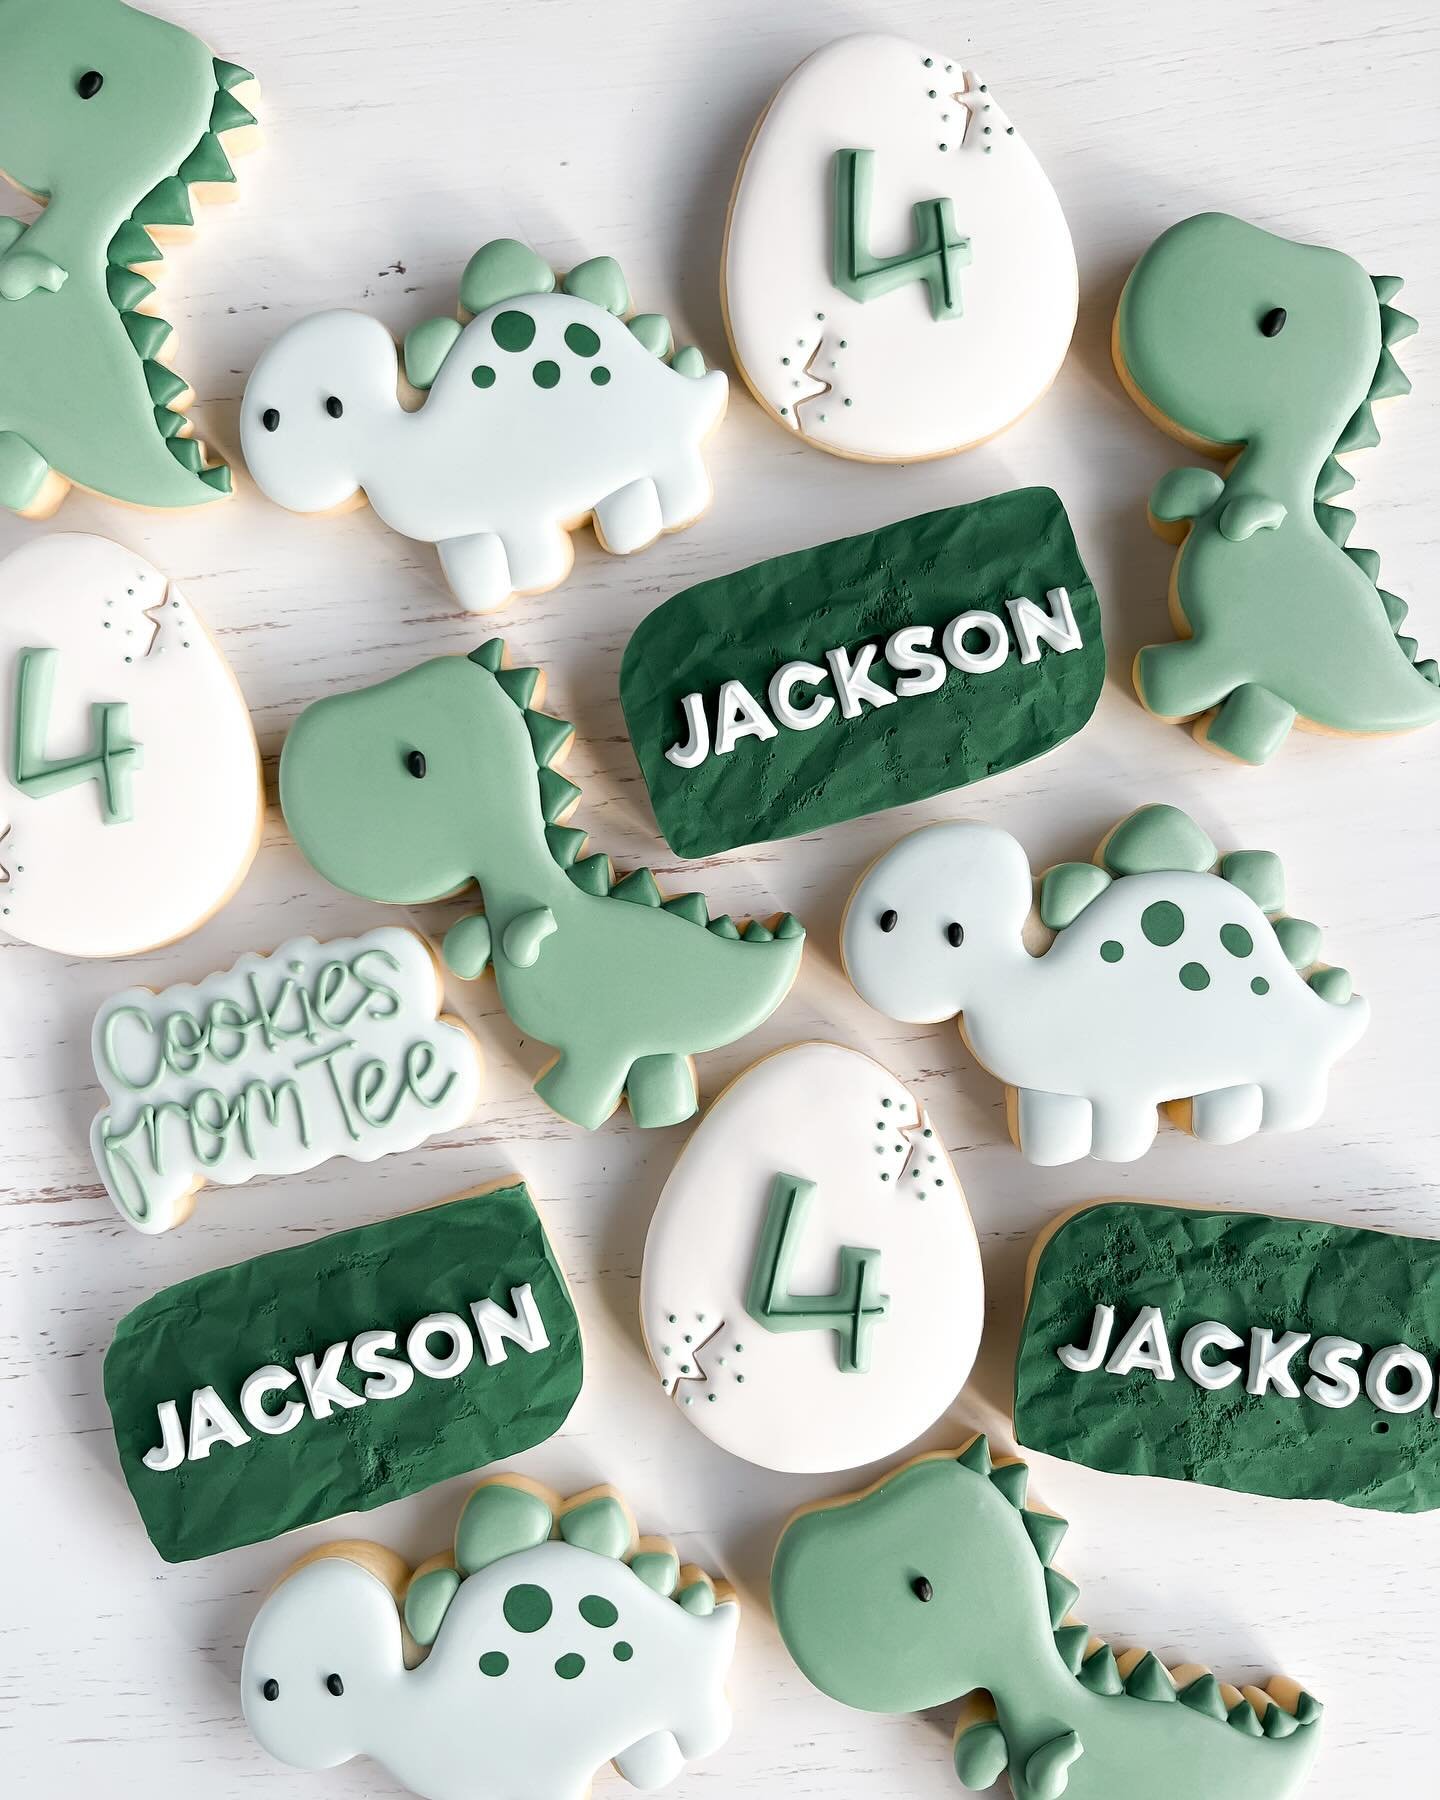 ROARing for this cute little dino set 🦖

________________________

#birthday #birthdaycookies #party #partycookies #dinosaur #dinosaurcookies #gift #vanillasugarcookies #sugarcookies #cookiedecorating #sugarcookiesofinstagram #cookiesofinstagram #cu